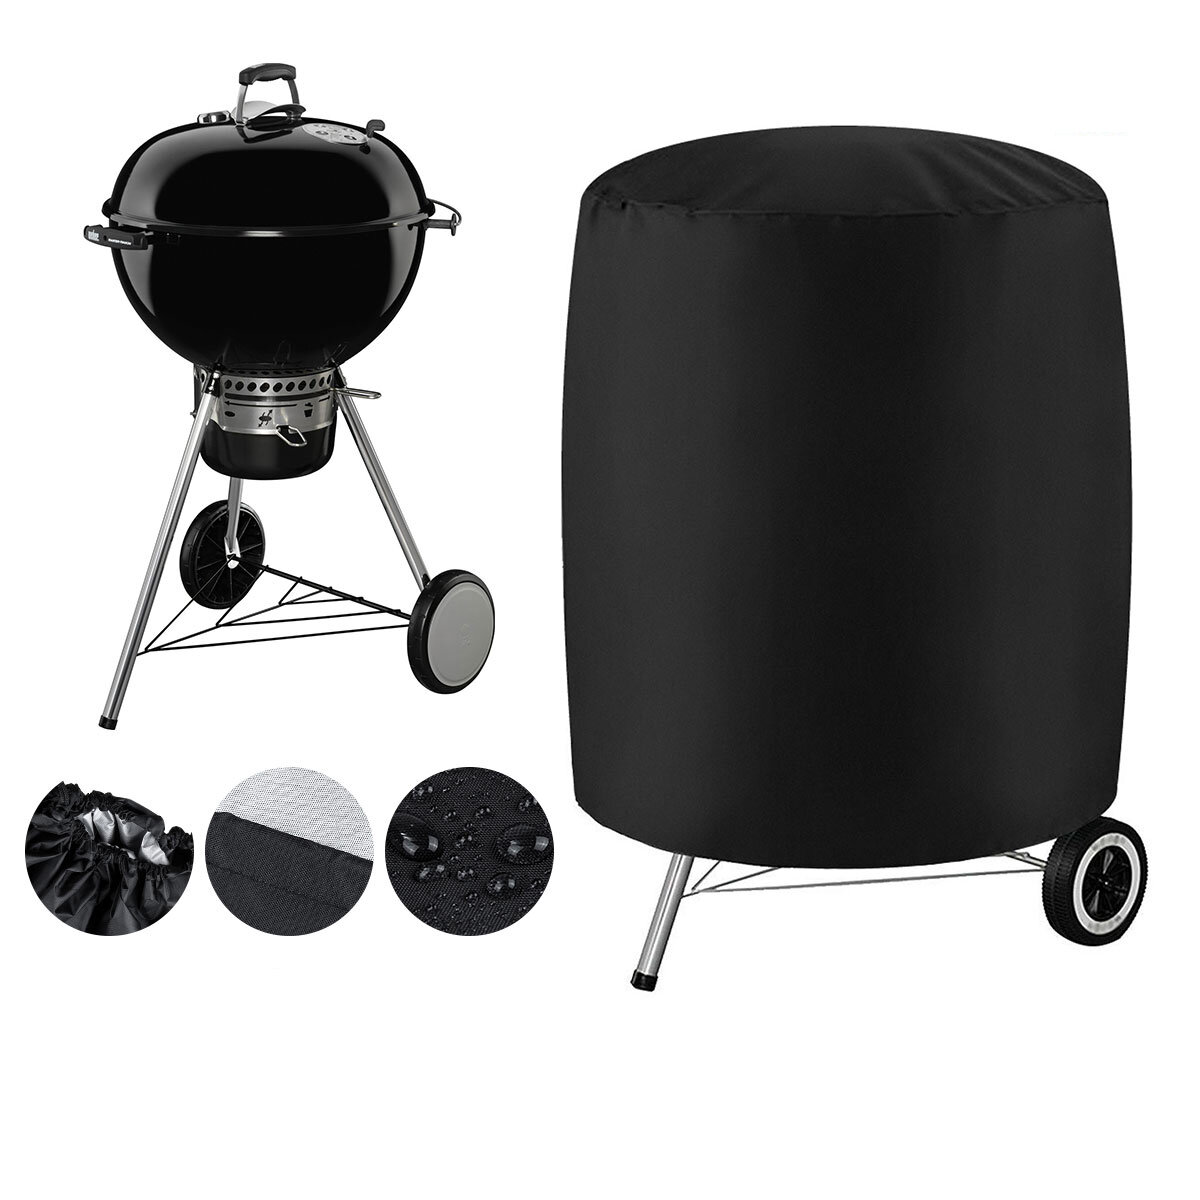 190D polyester BBQ-stove grillhoes tuin patio UV-stofbeschermer